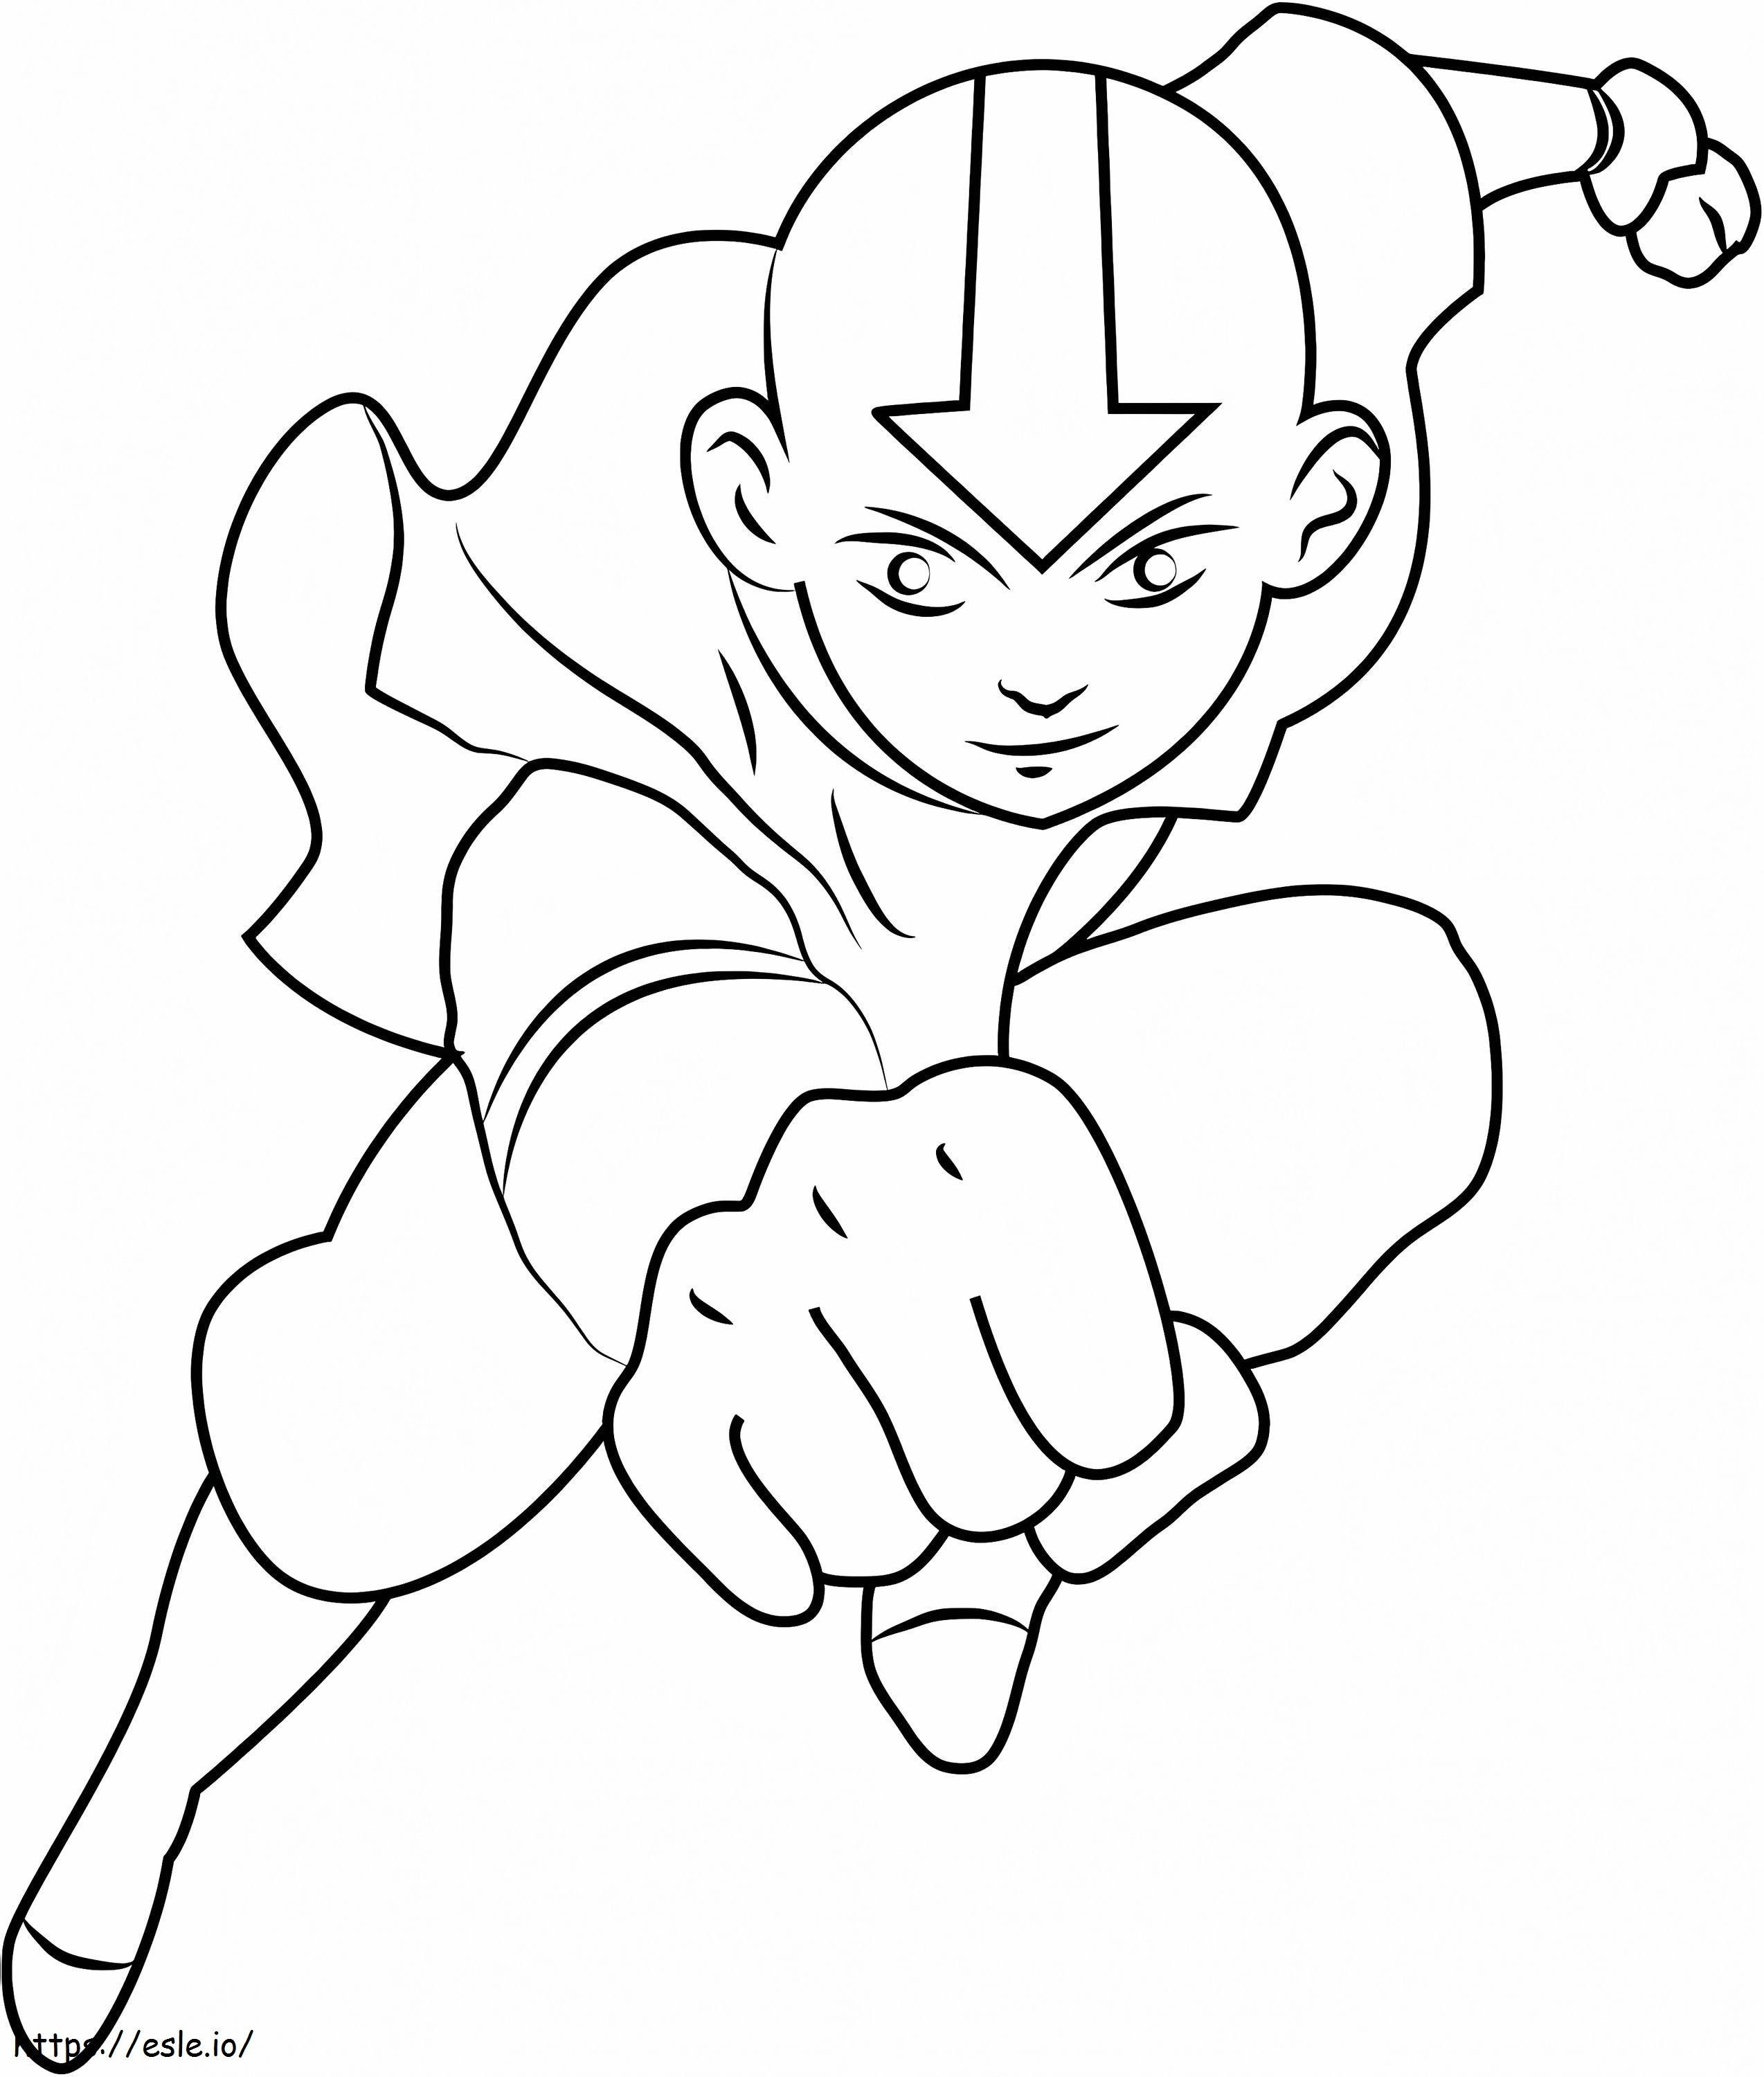 1532491065 Cool Aang A4 coloring page